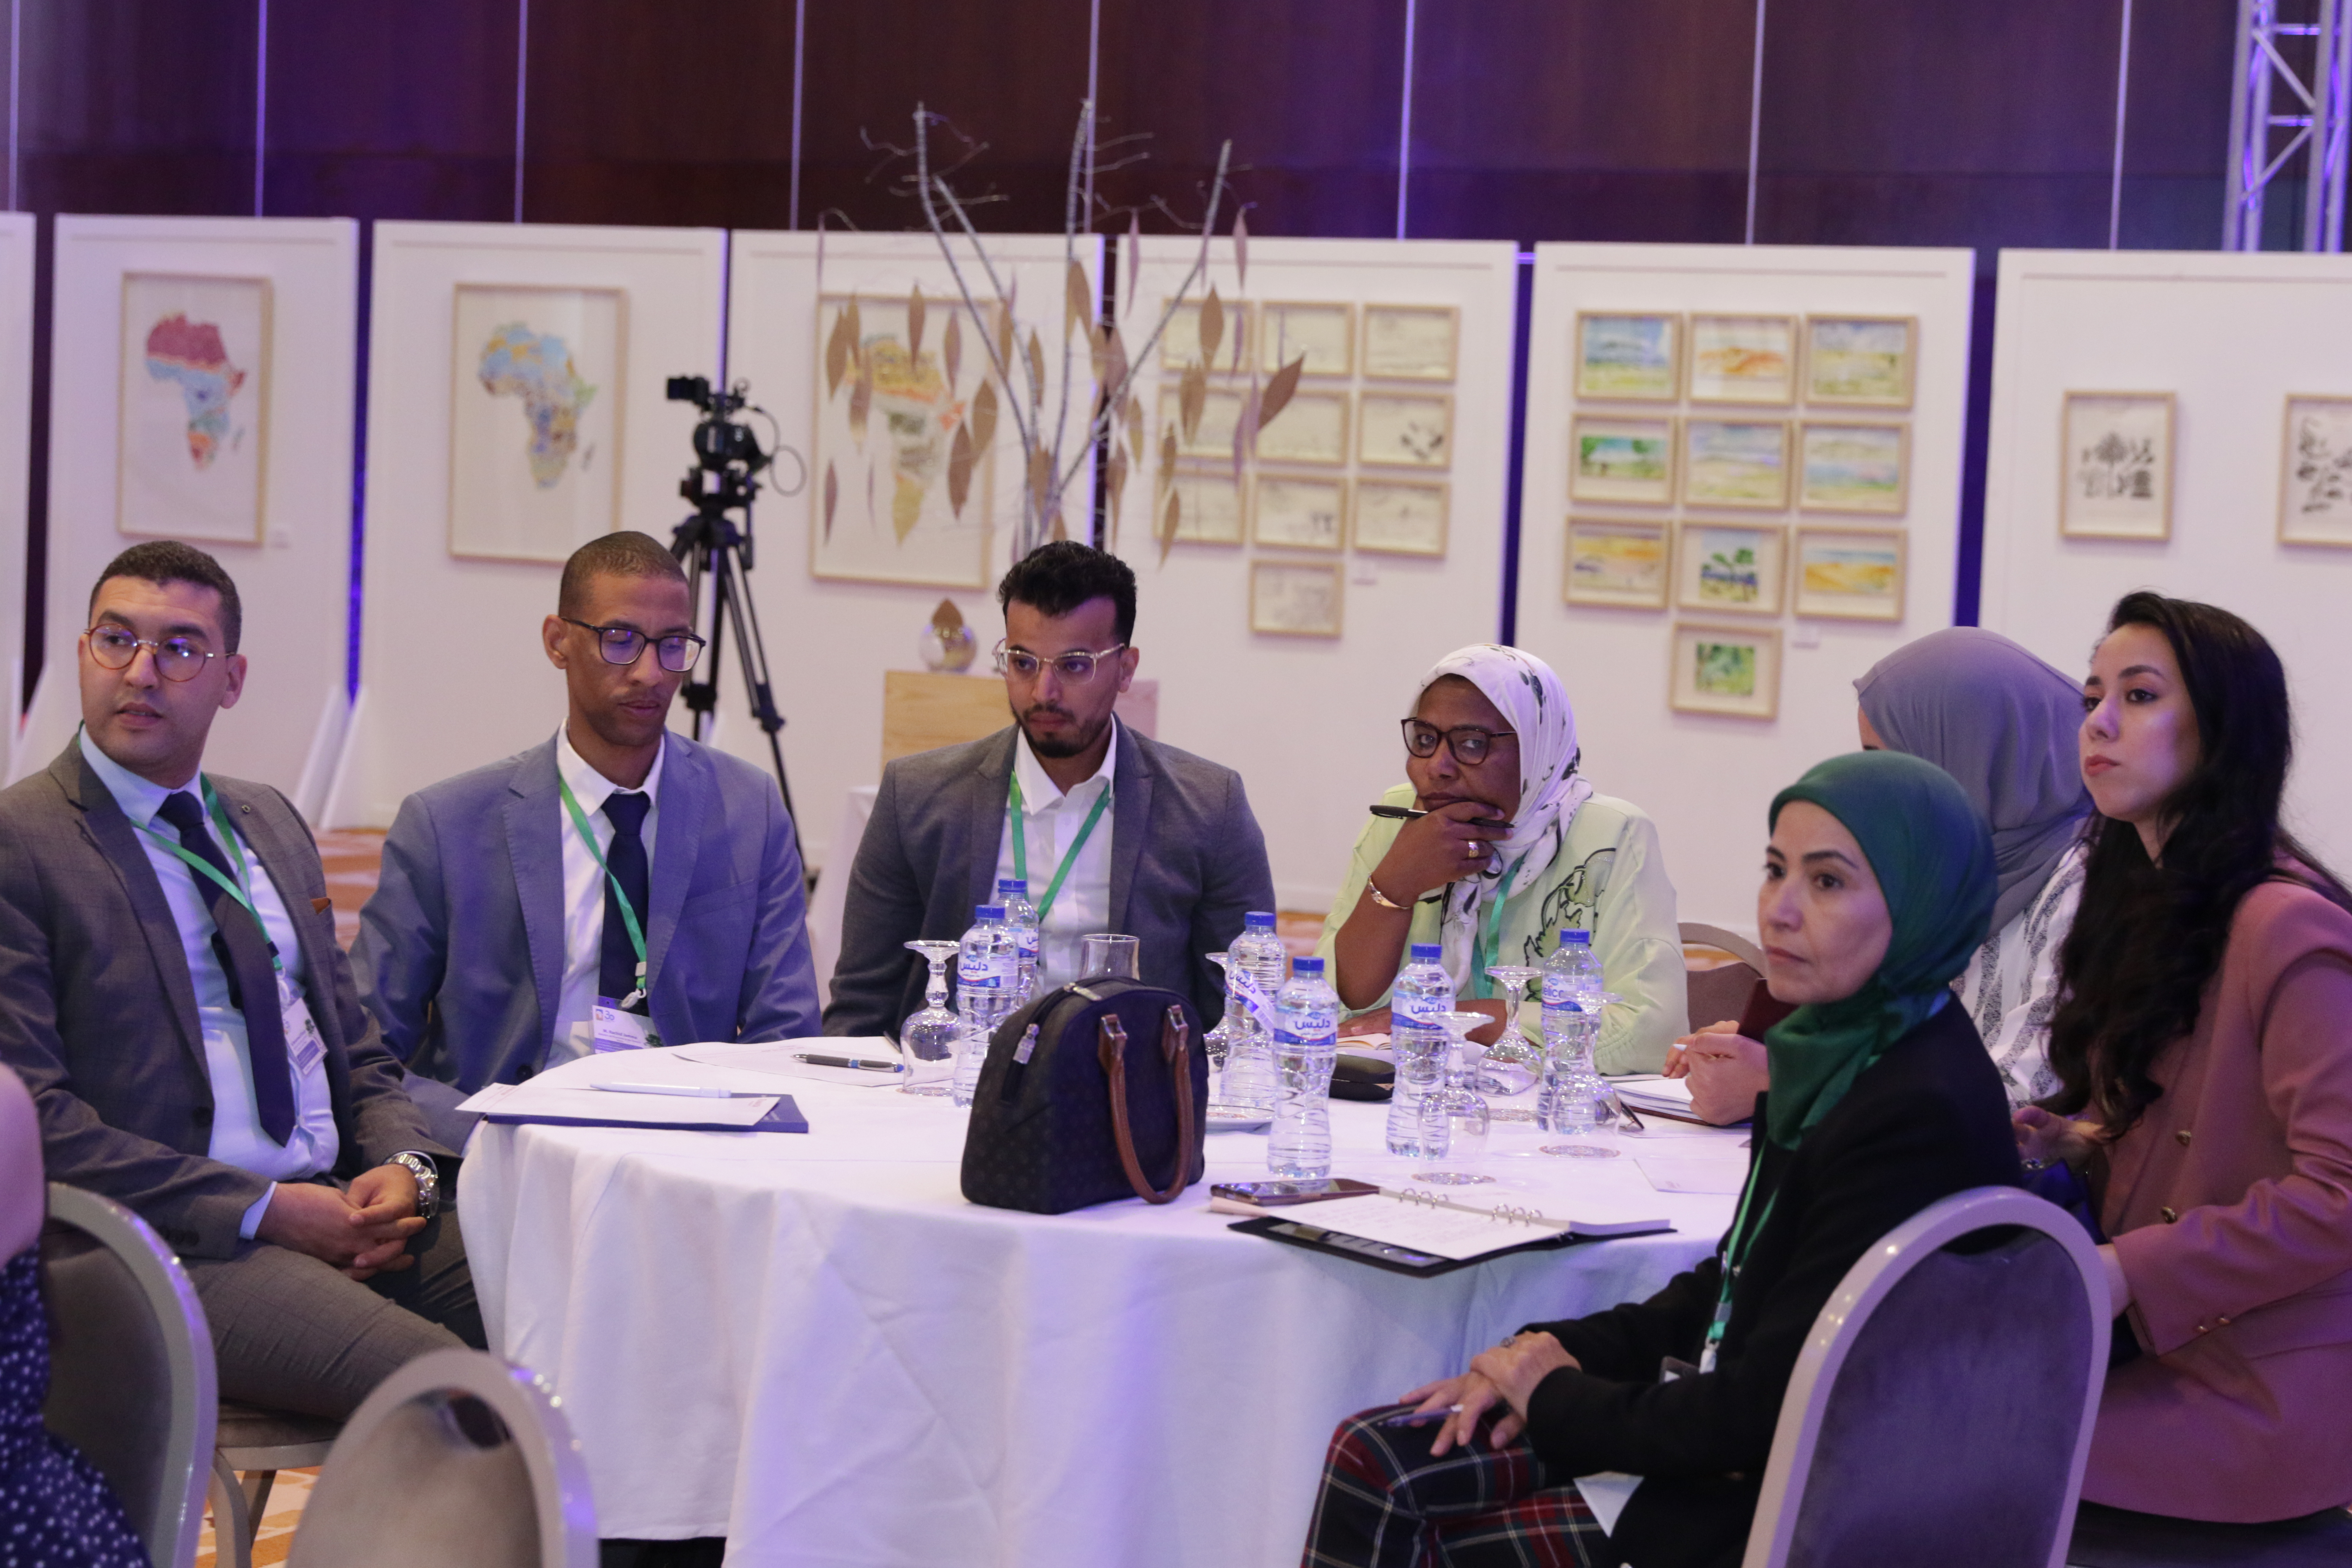 took the regional workshop - Restitution of the "Water Stress in North Africa"